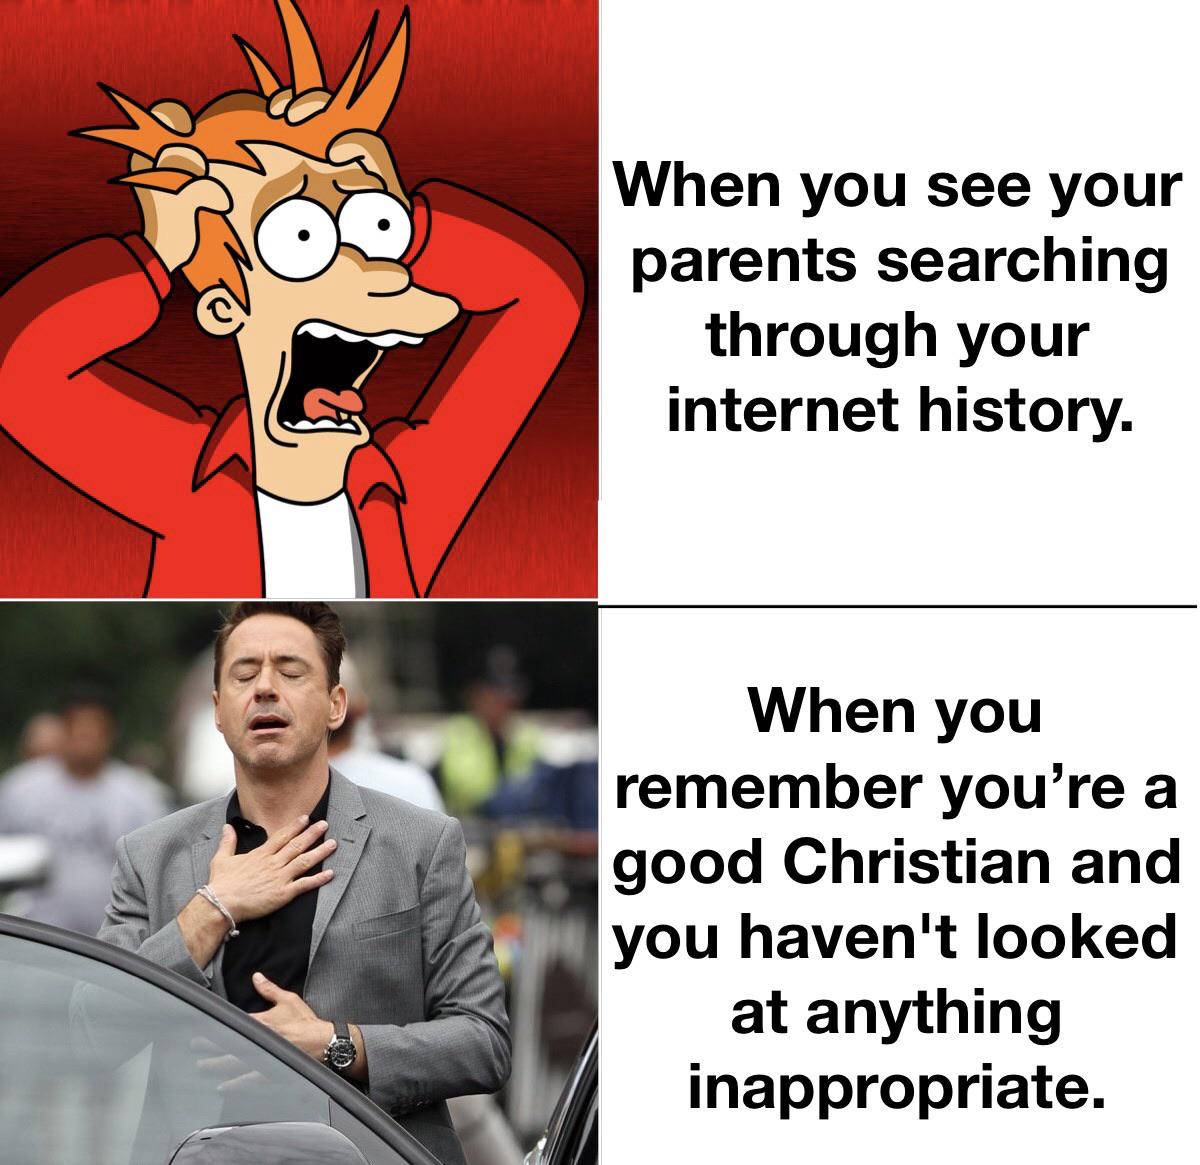 christian christian-memes christian text: 91 4 When you see your parents searching through your internet history. When you remember you're a good Christian and you havenlt looked at anything inappropriate. 